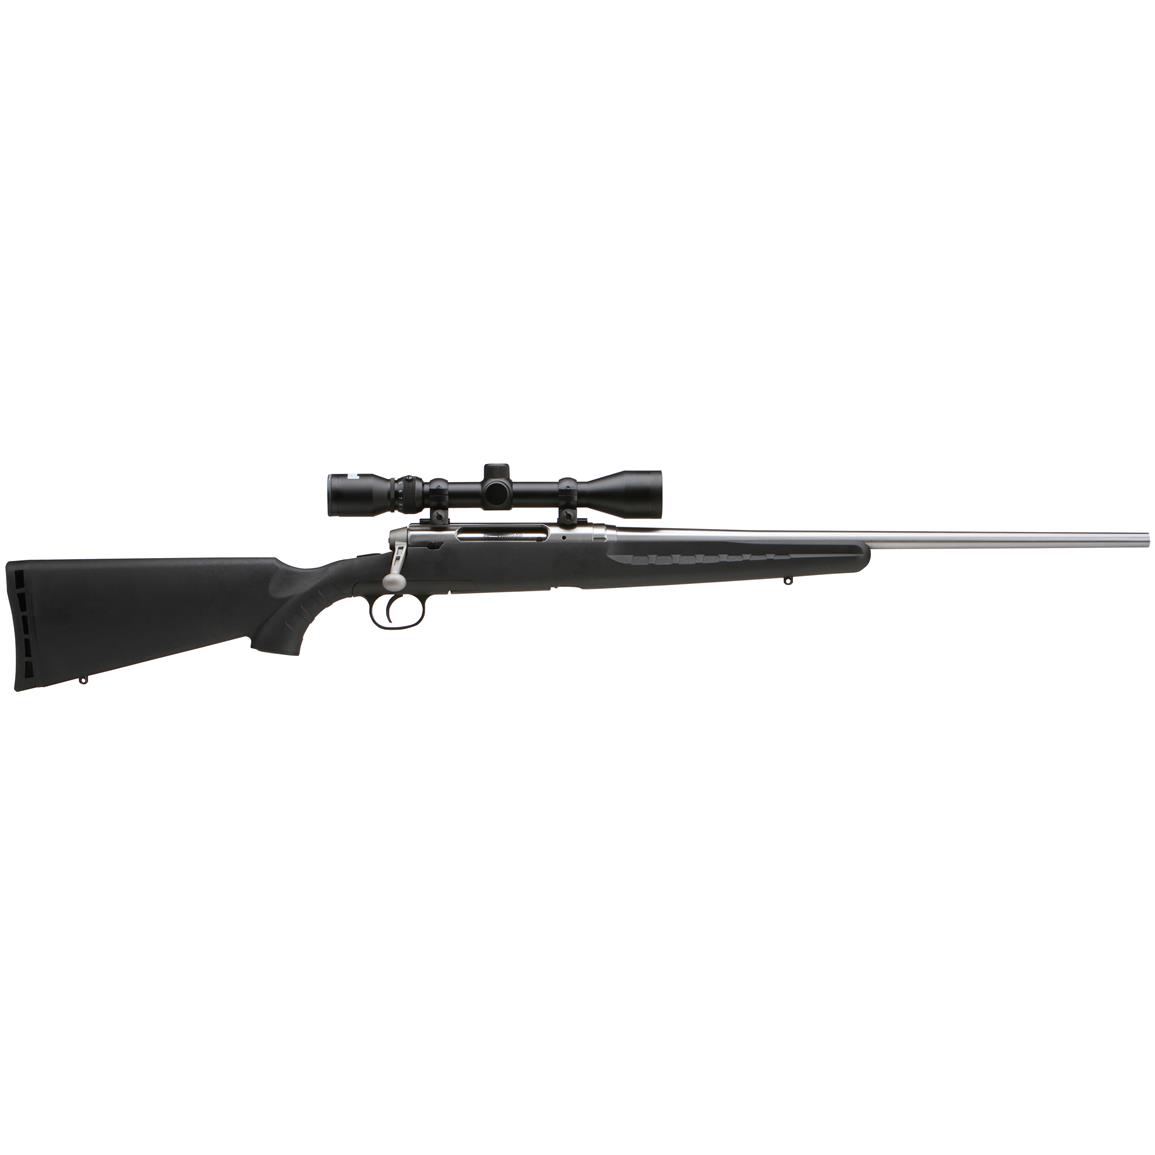 Savage Axis Stainless XP, Bolt Action, .30-06 Springfield, 22" Barrel, 3-9x40 Scope, 4 1 Rounds